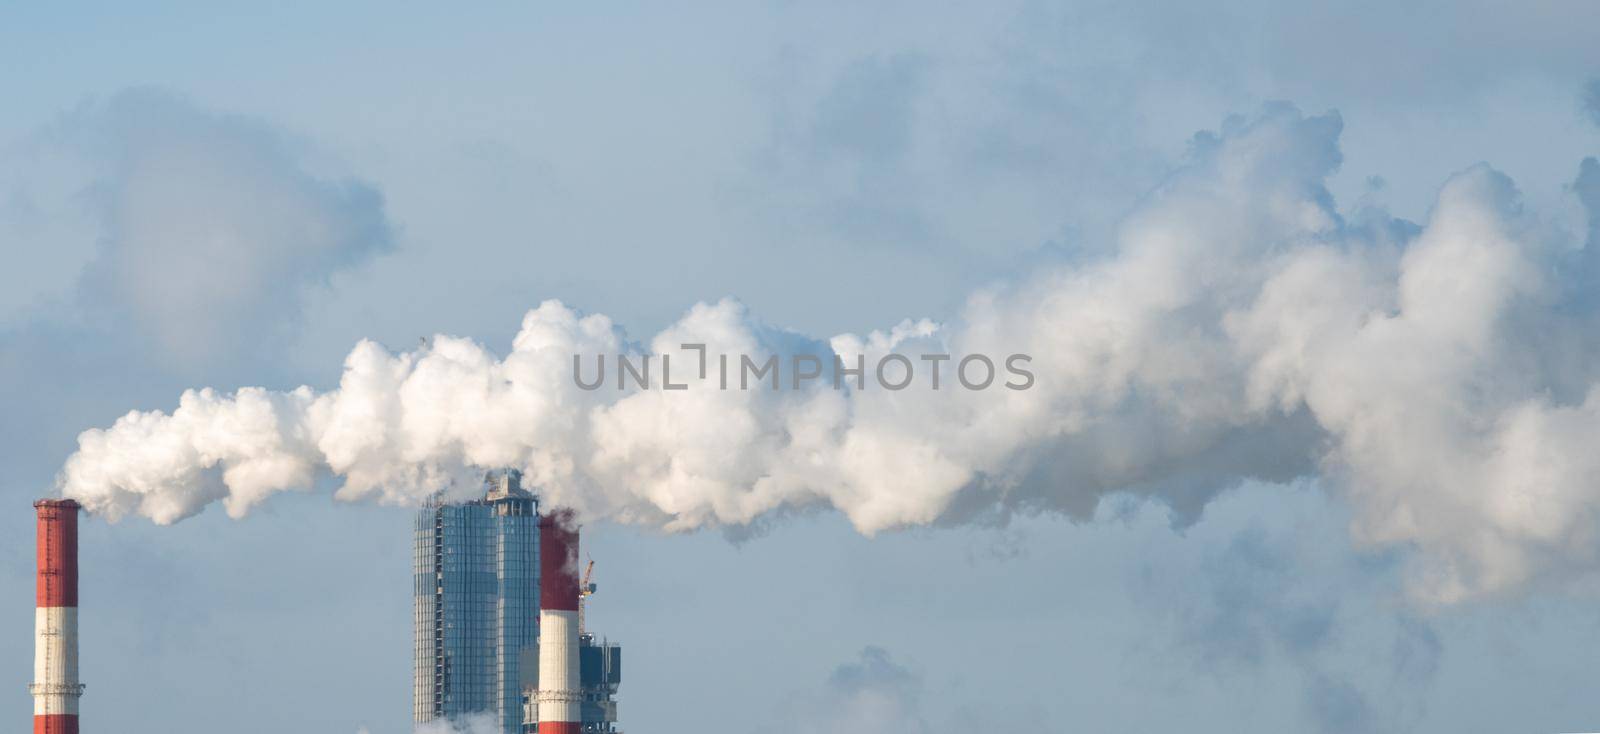 Smoke from the chimneys of a combined heat and power plant against the backdrop of a skyscraper under construction on a frosty winter day.